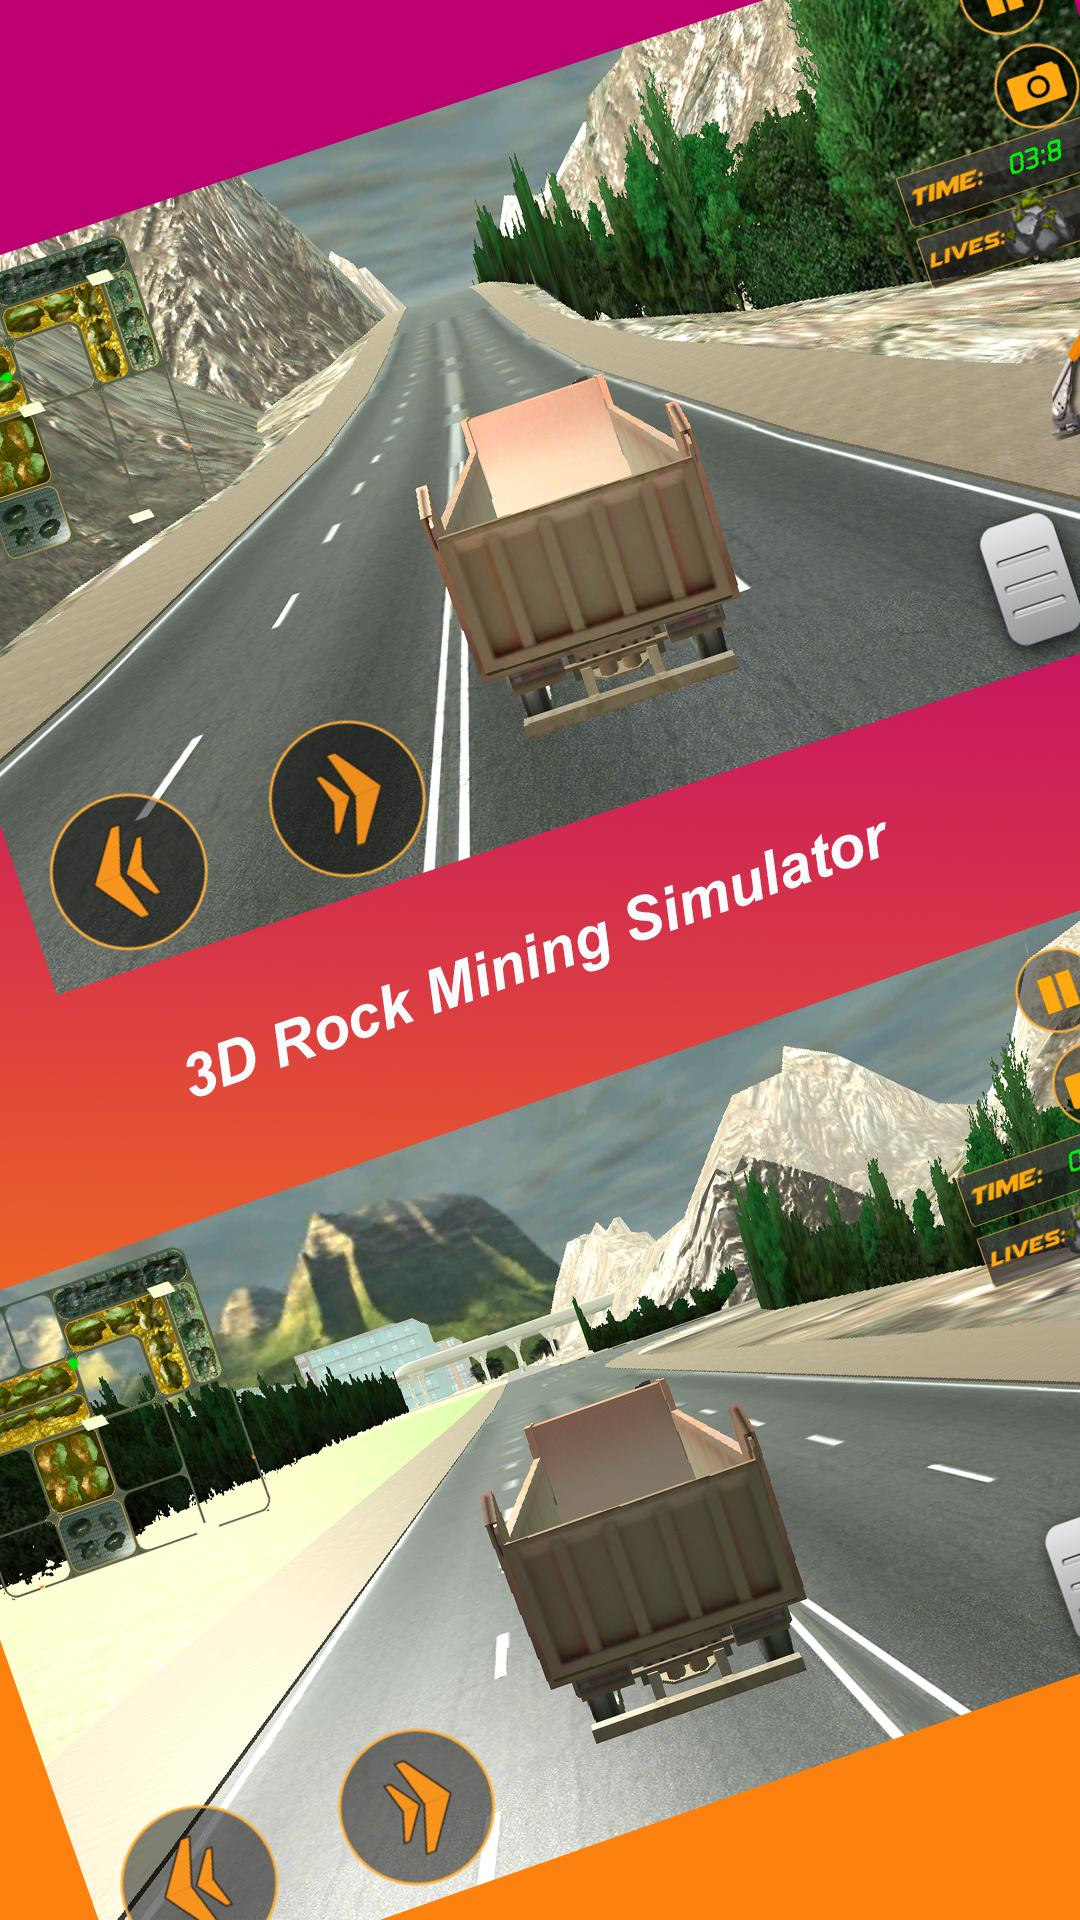 3d Rock Mining Simulator For Android Apk Download